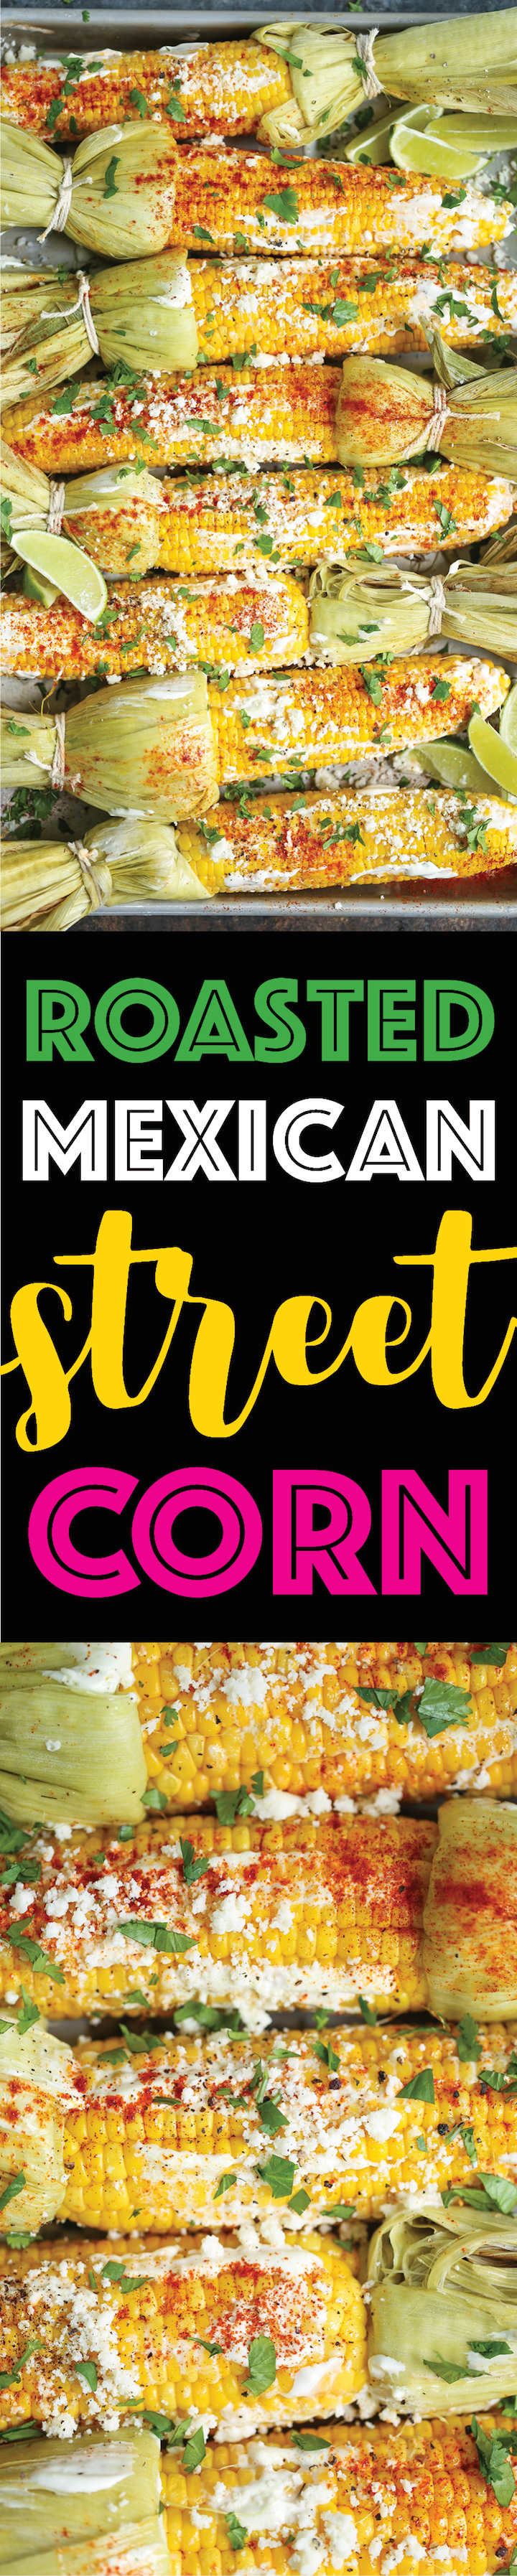 Roasted Mexican Street Corn - You can easily make the classic Mexican street food right at home now. BAKED OR GRILLED! And this cream sauce is TO DIE FOR!!